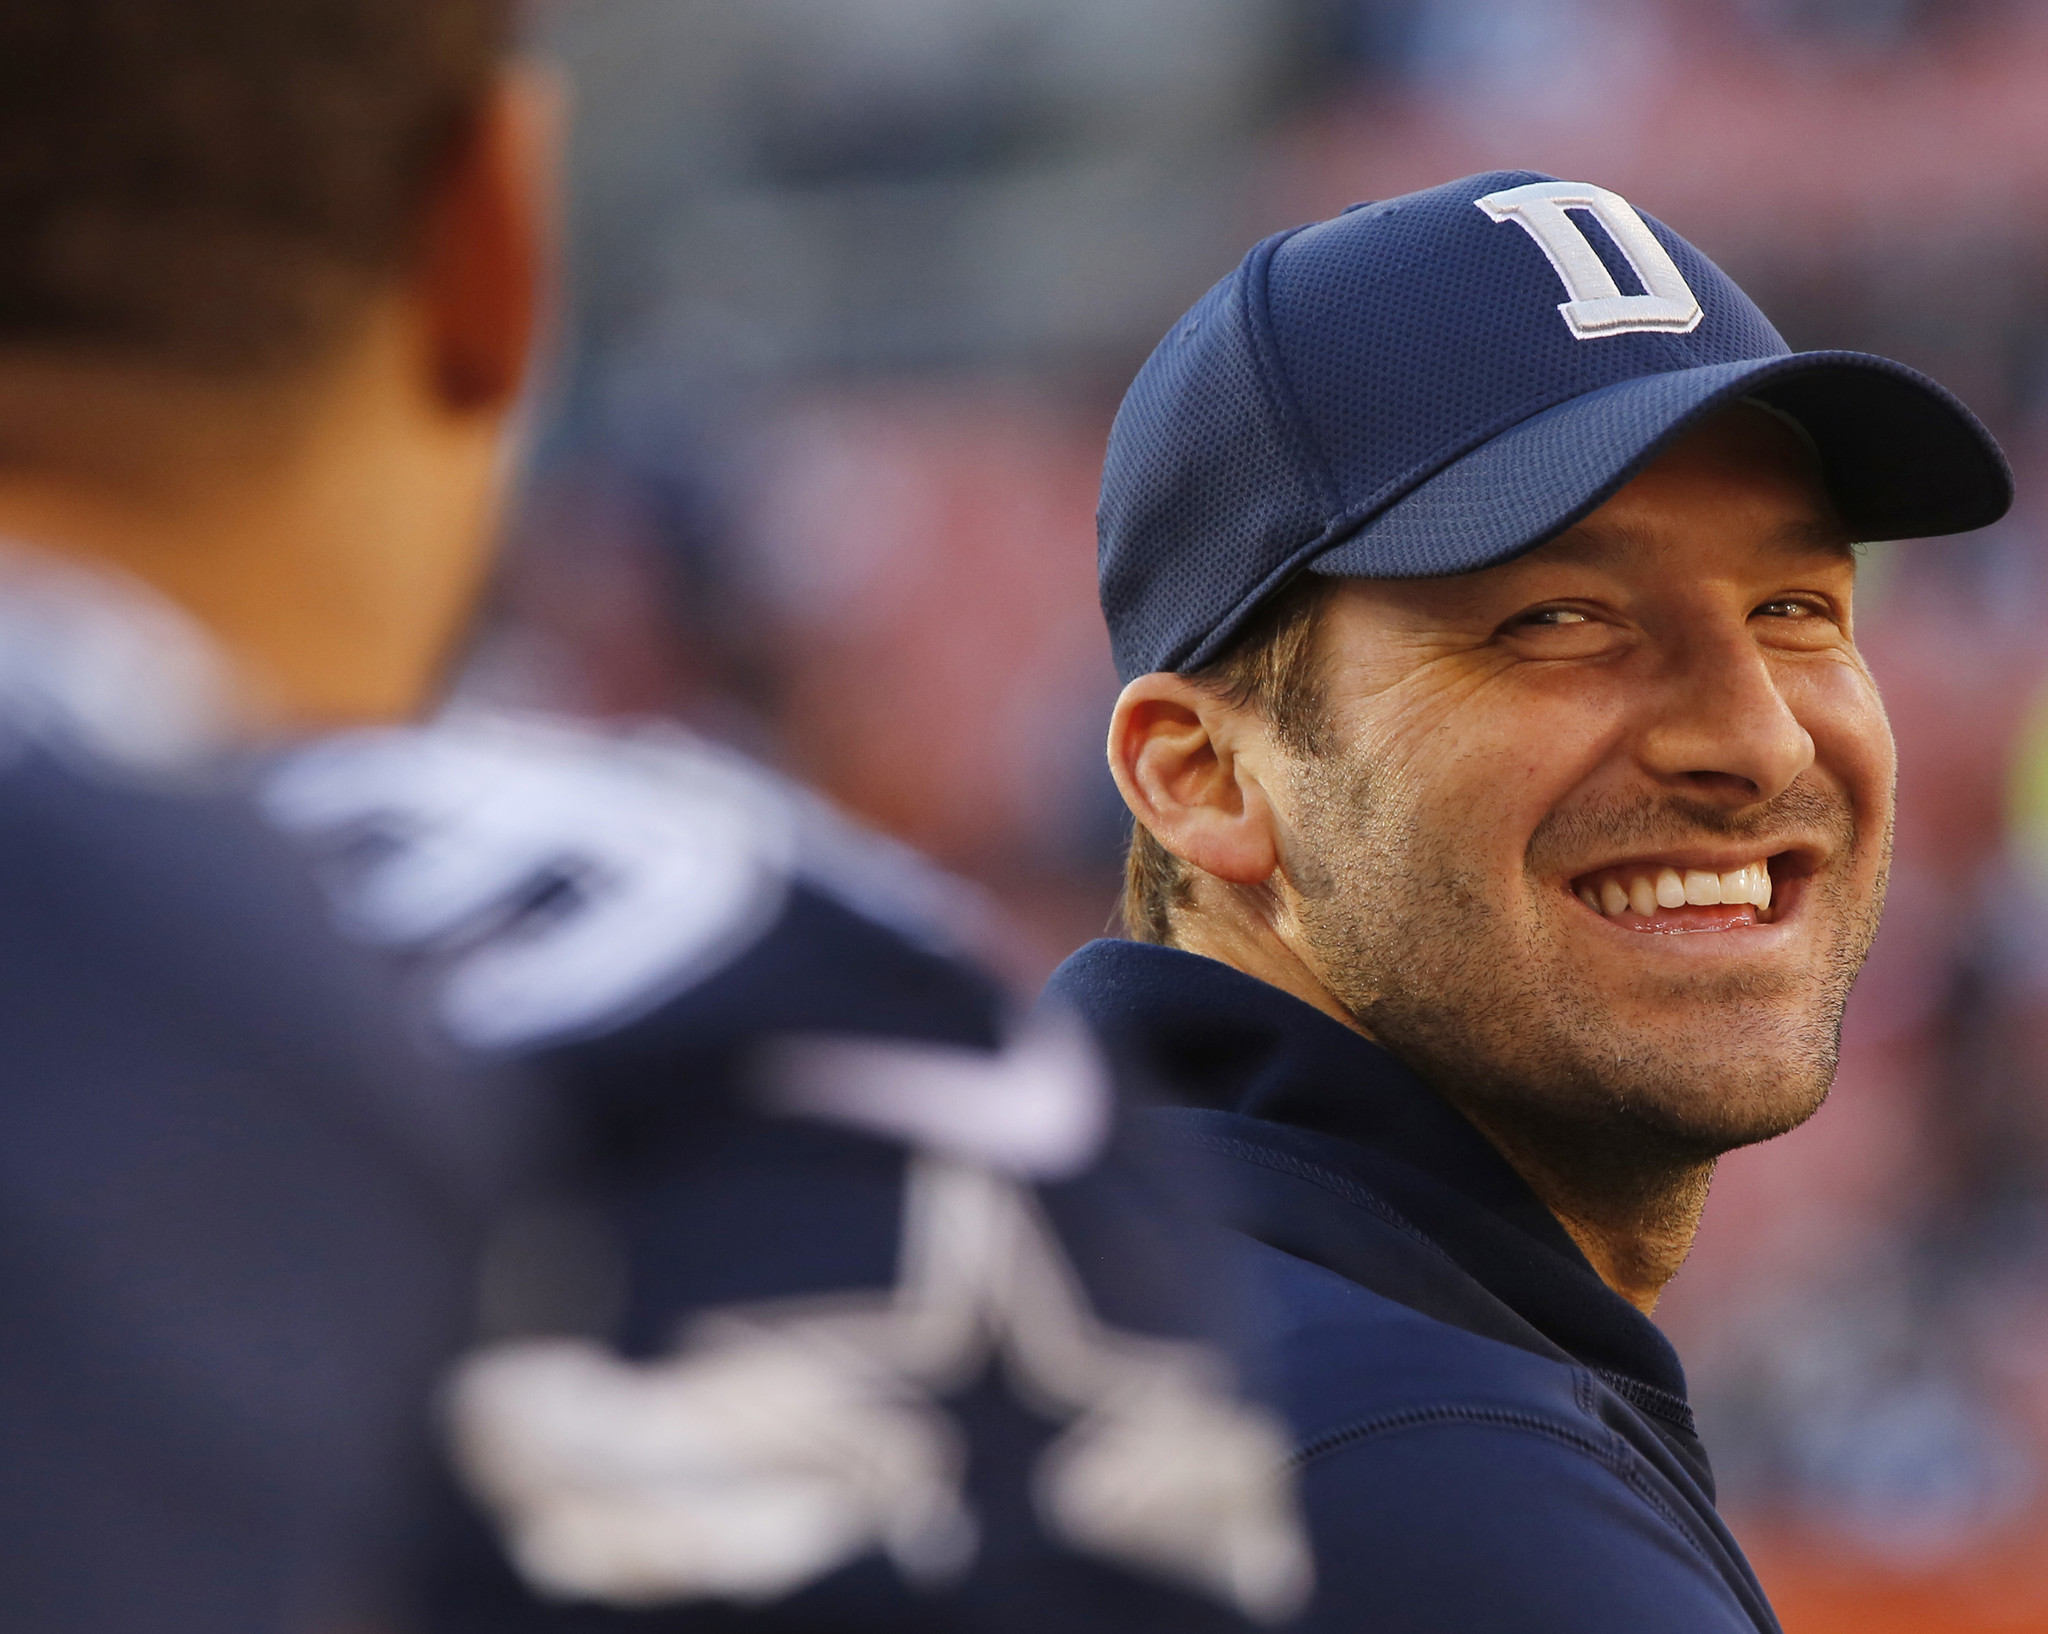 Watch Tony Romo predict plays in his broadcasting debut on CBS - Chicago Tribune2048 x 1634